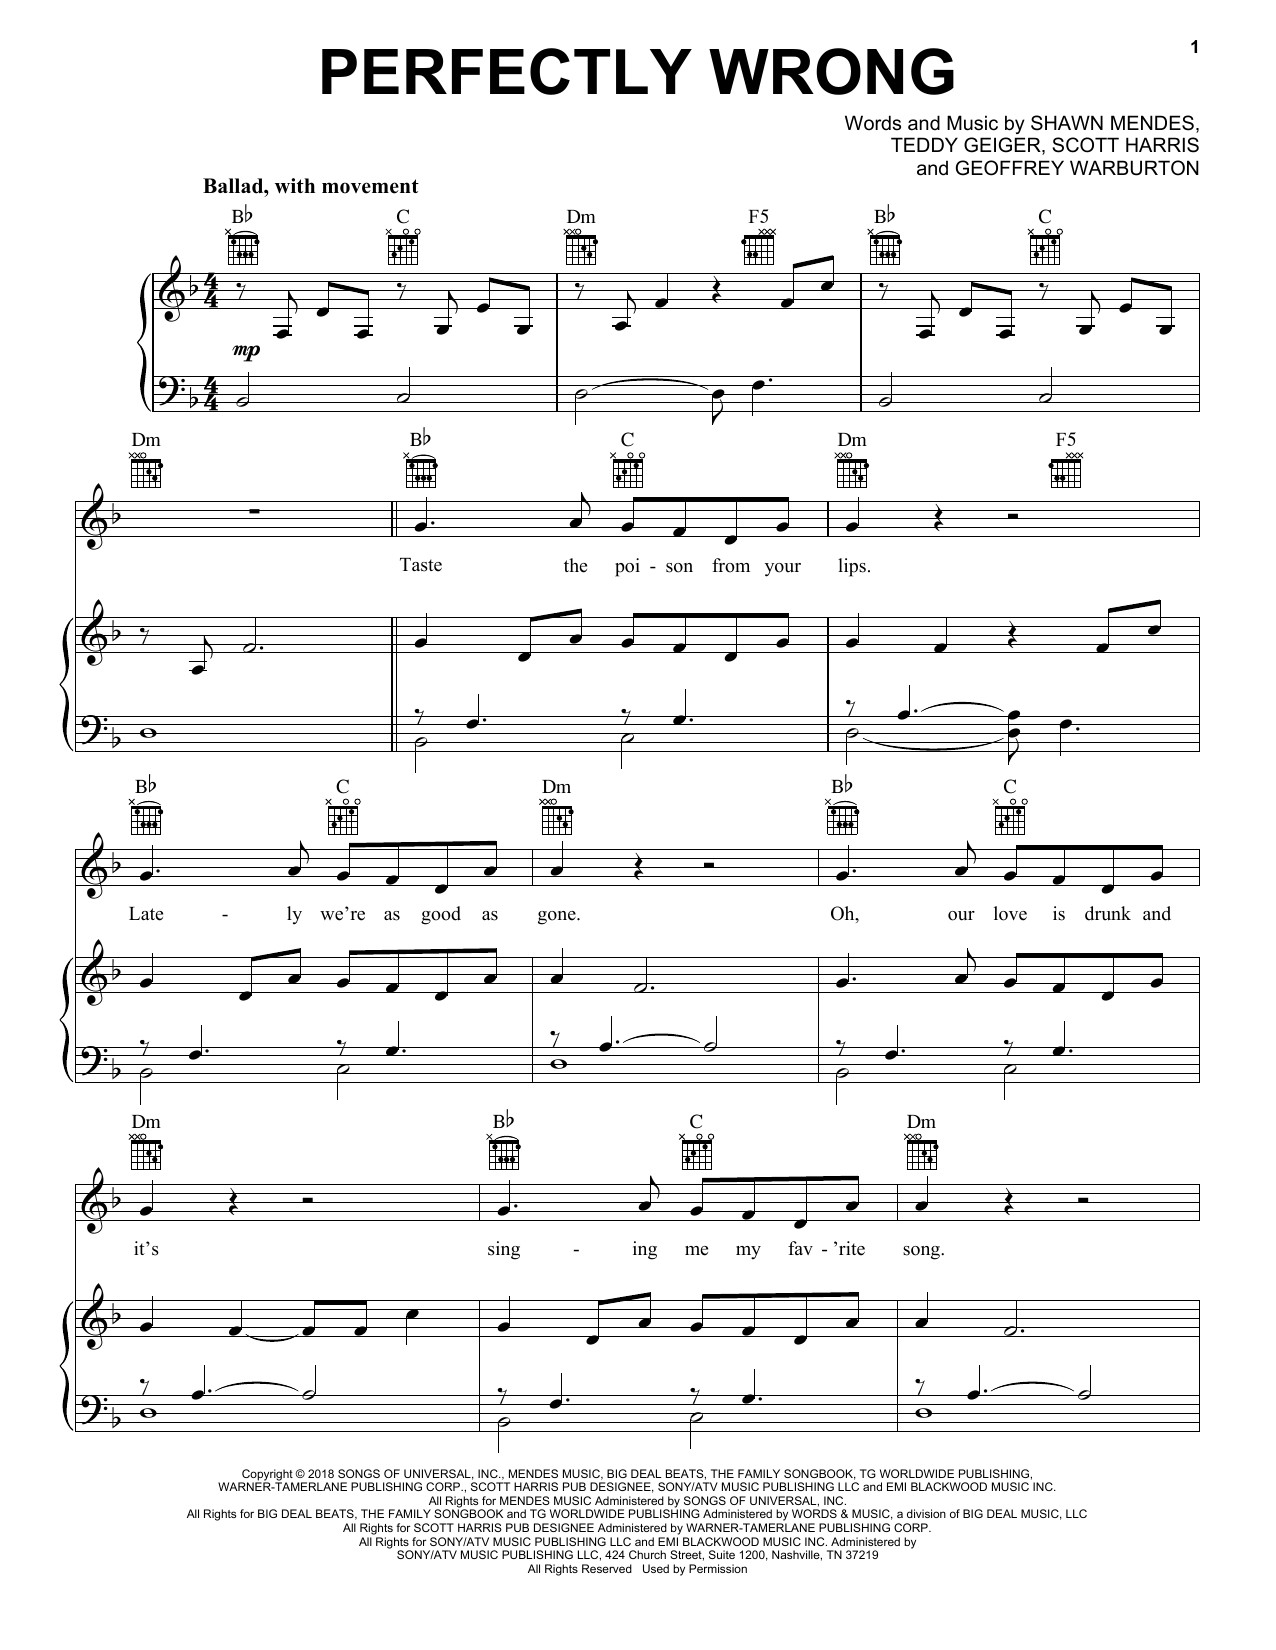 Download Shawn Mendes Perfectly Wrong Sheet Music